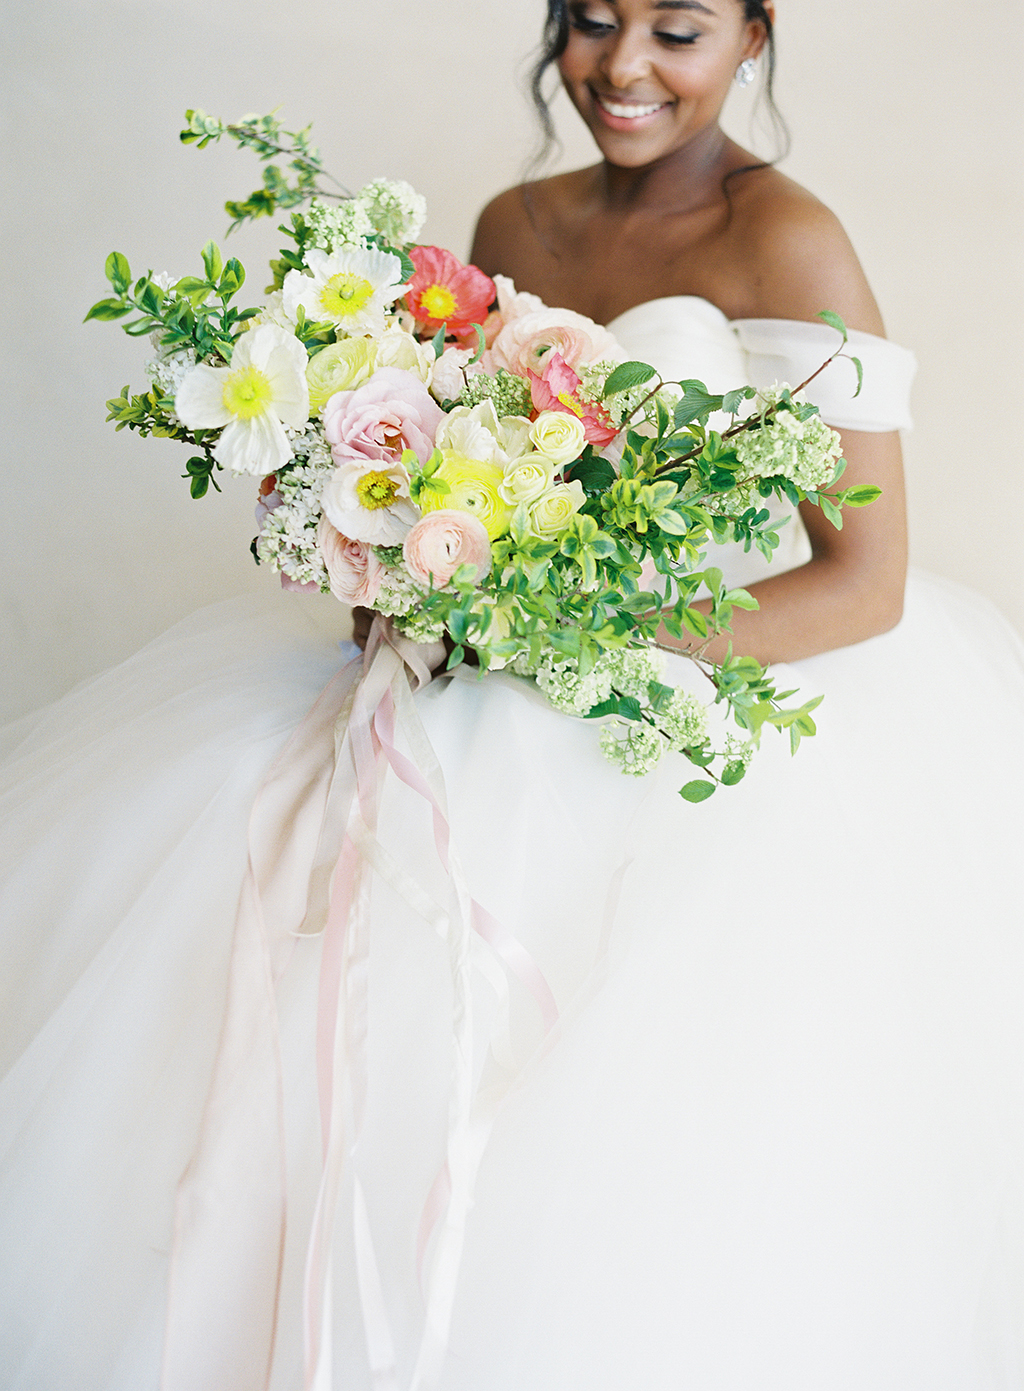 a colorful spring bouquet by art with nature and an amazing wedding gown by lazaro bridal at pelican hill resort